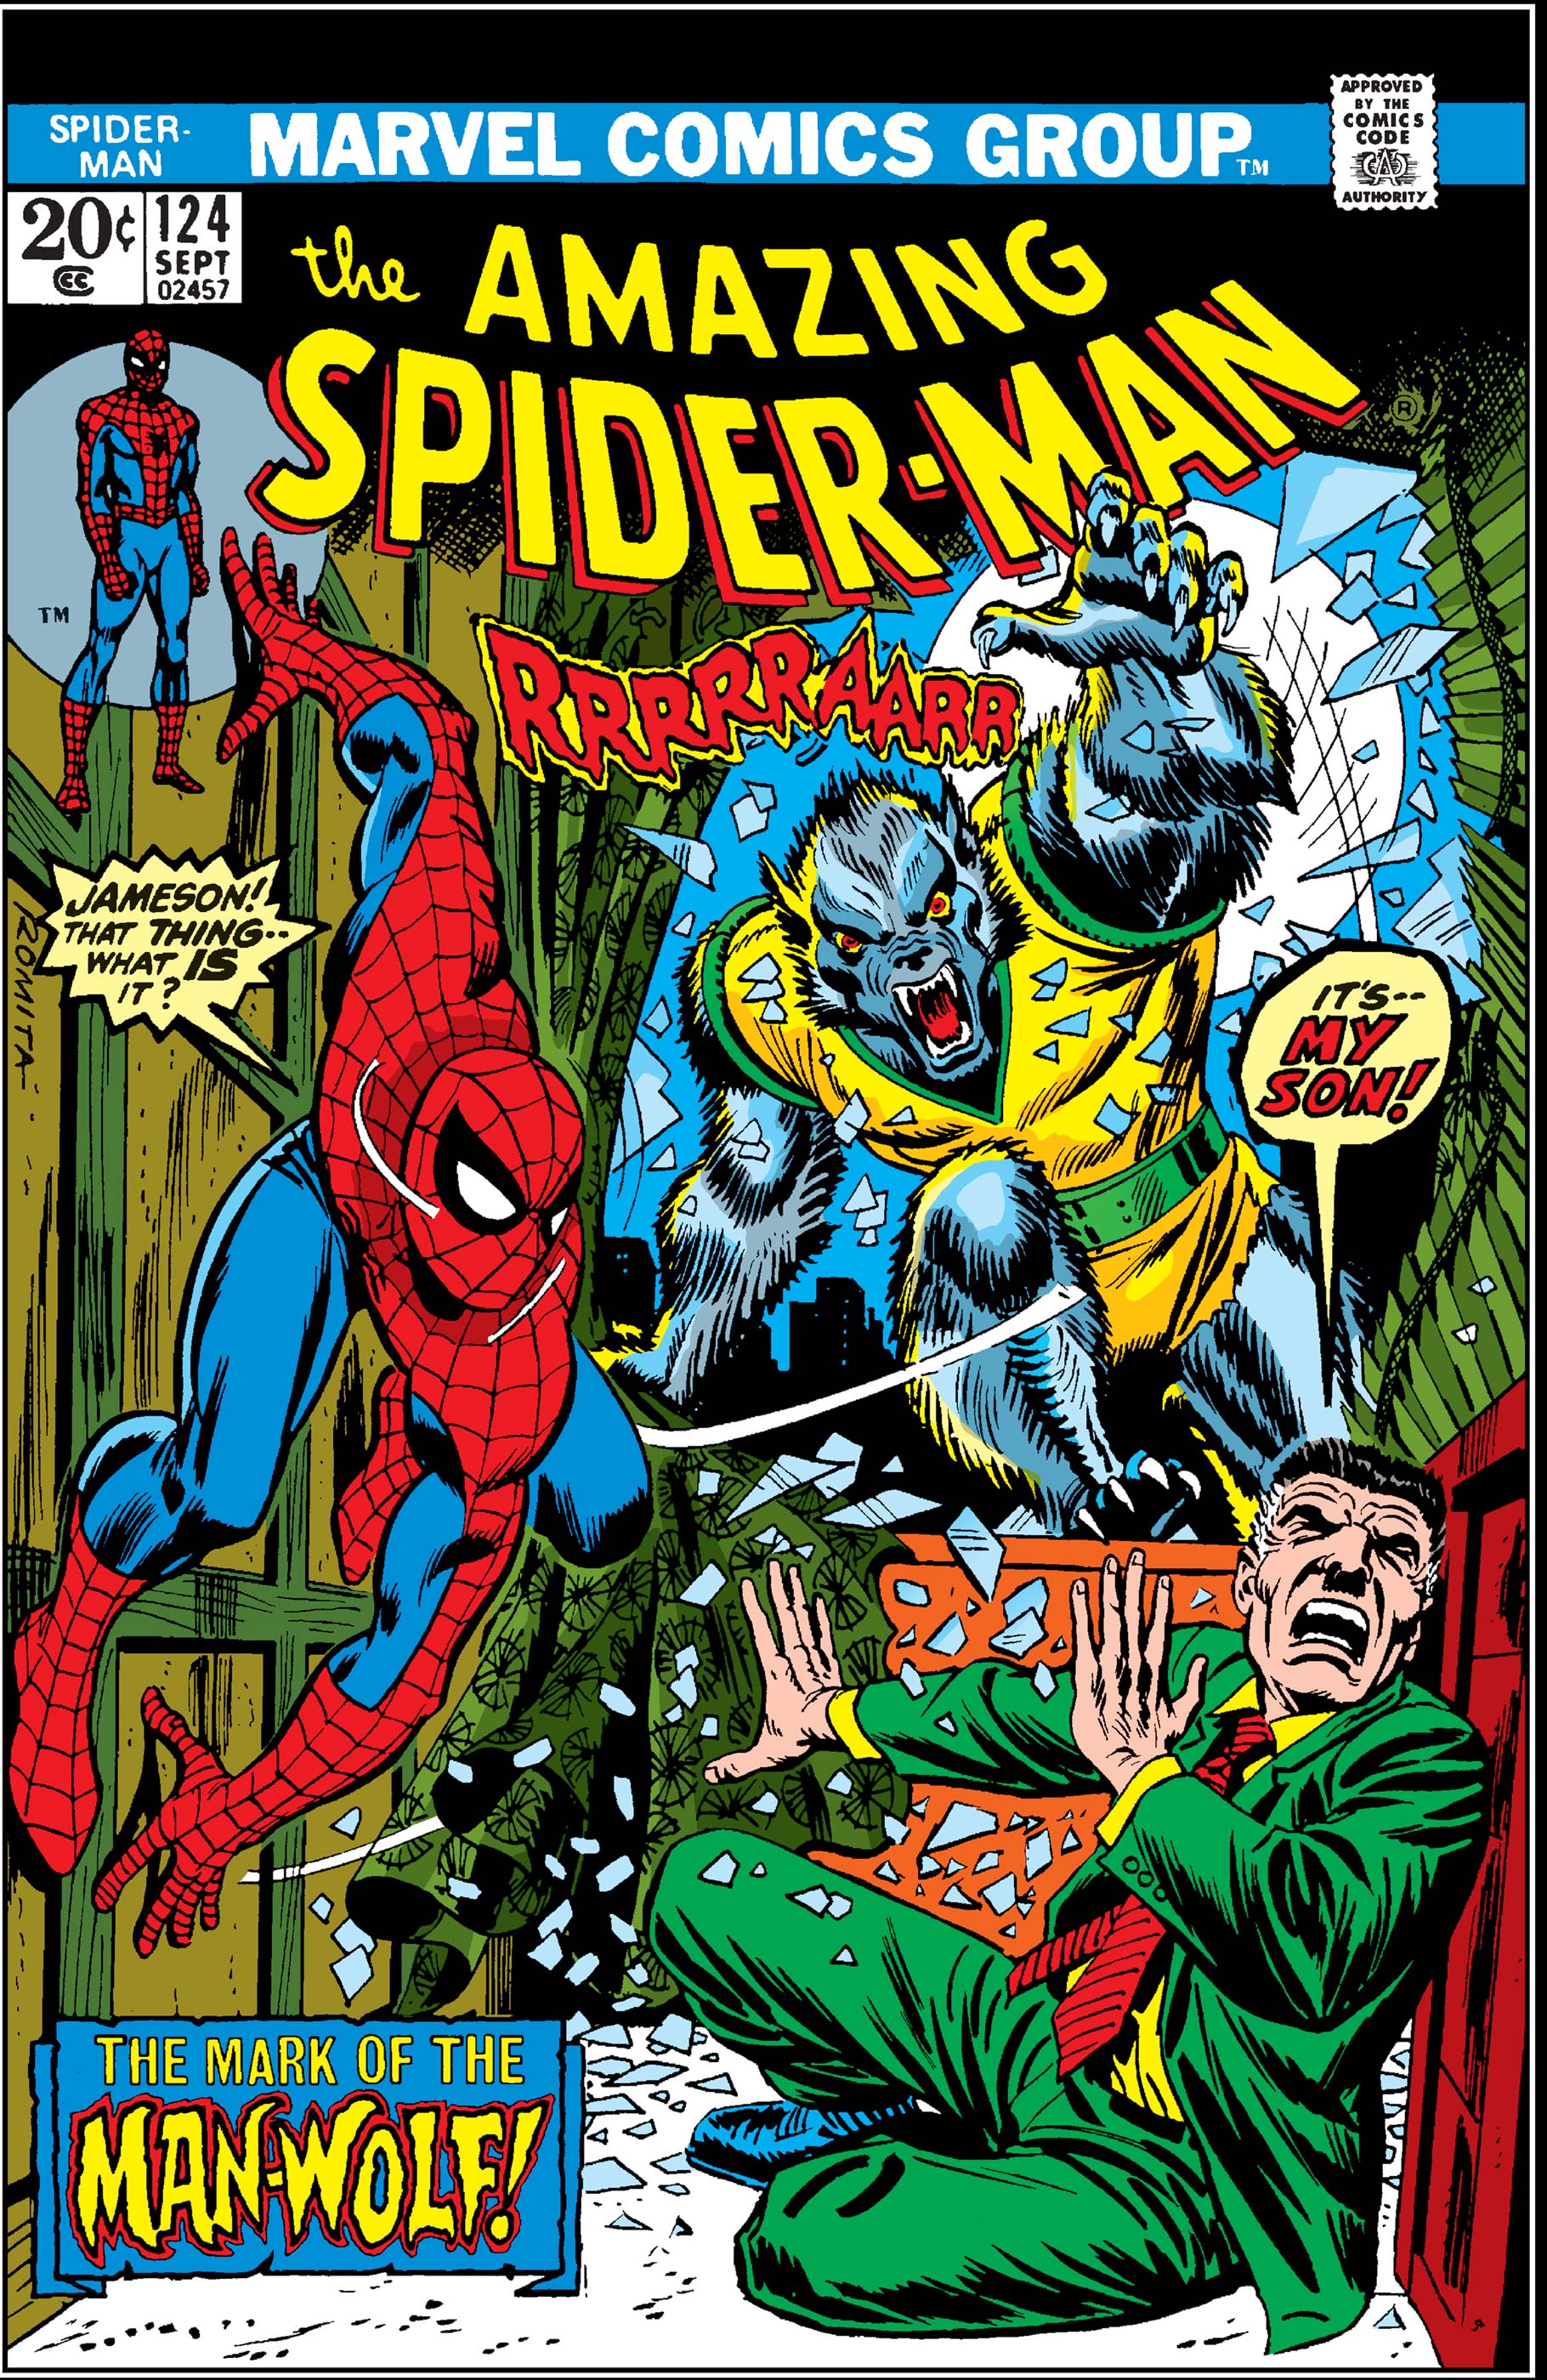 The Amazing Spider-Man (1963) #124 | Comic Issues | Marvel